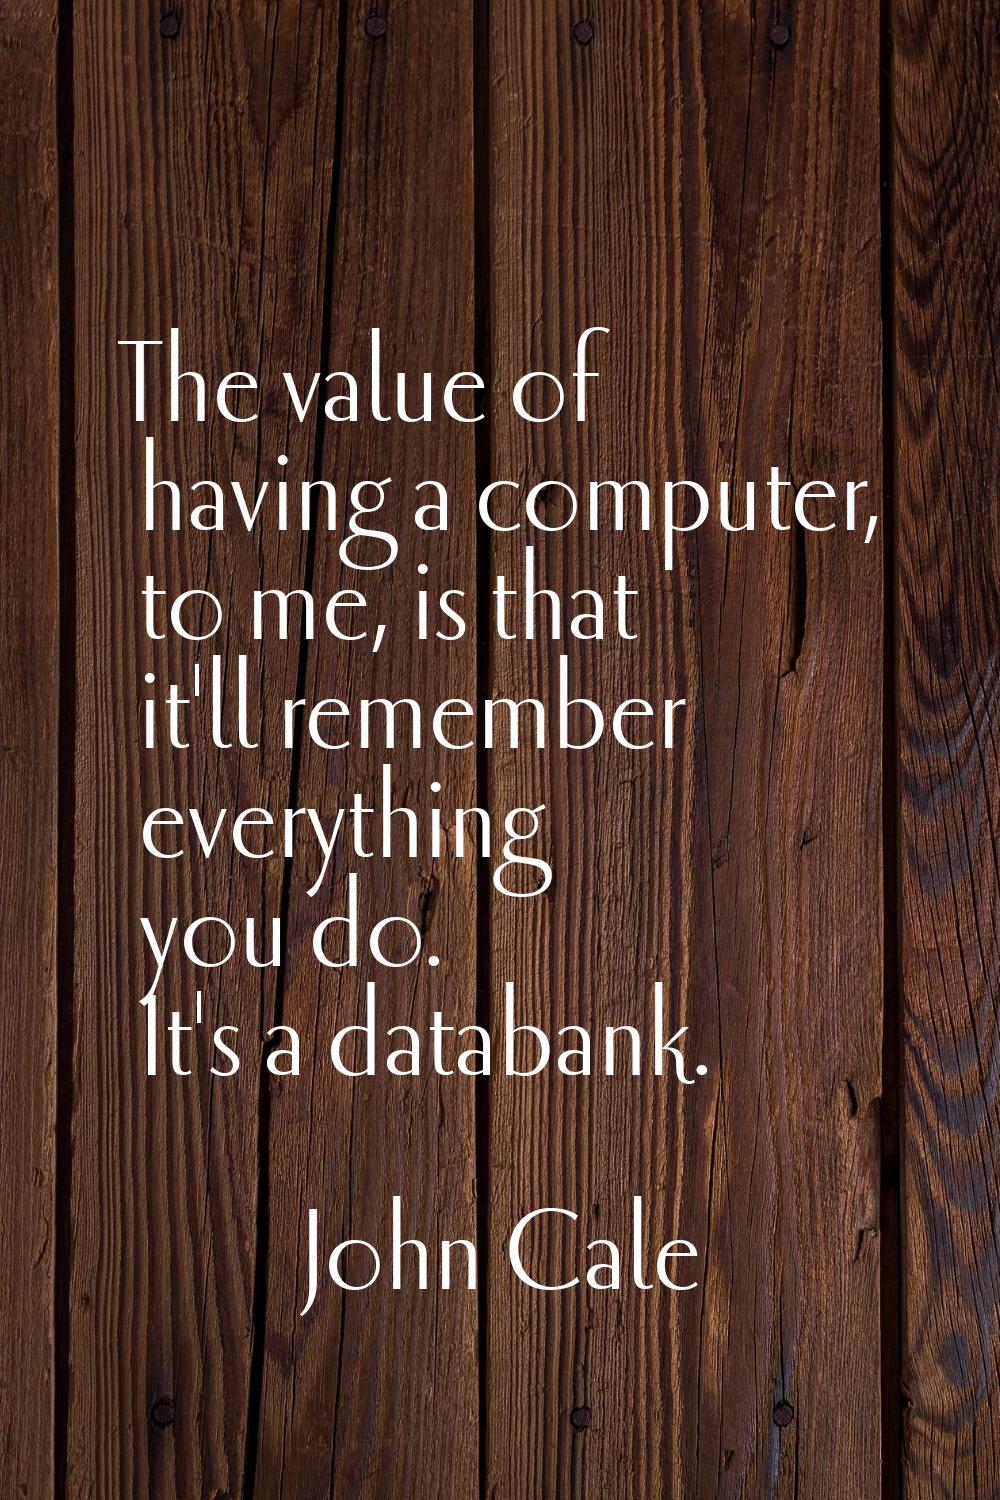 The value of having a computer, to me, is that it'll remember everything you do. It's a databank.